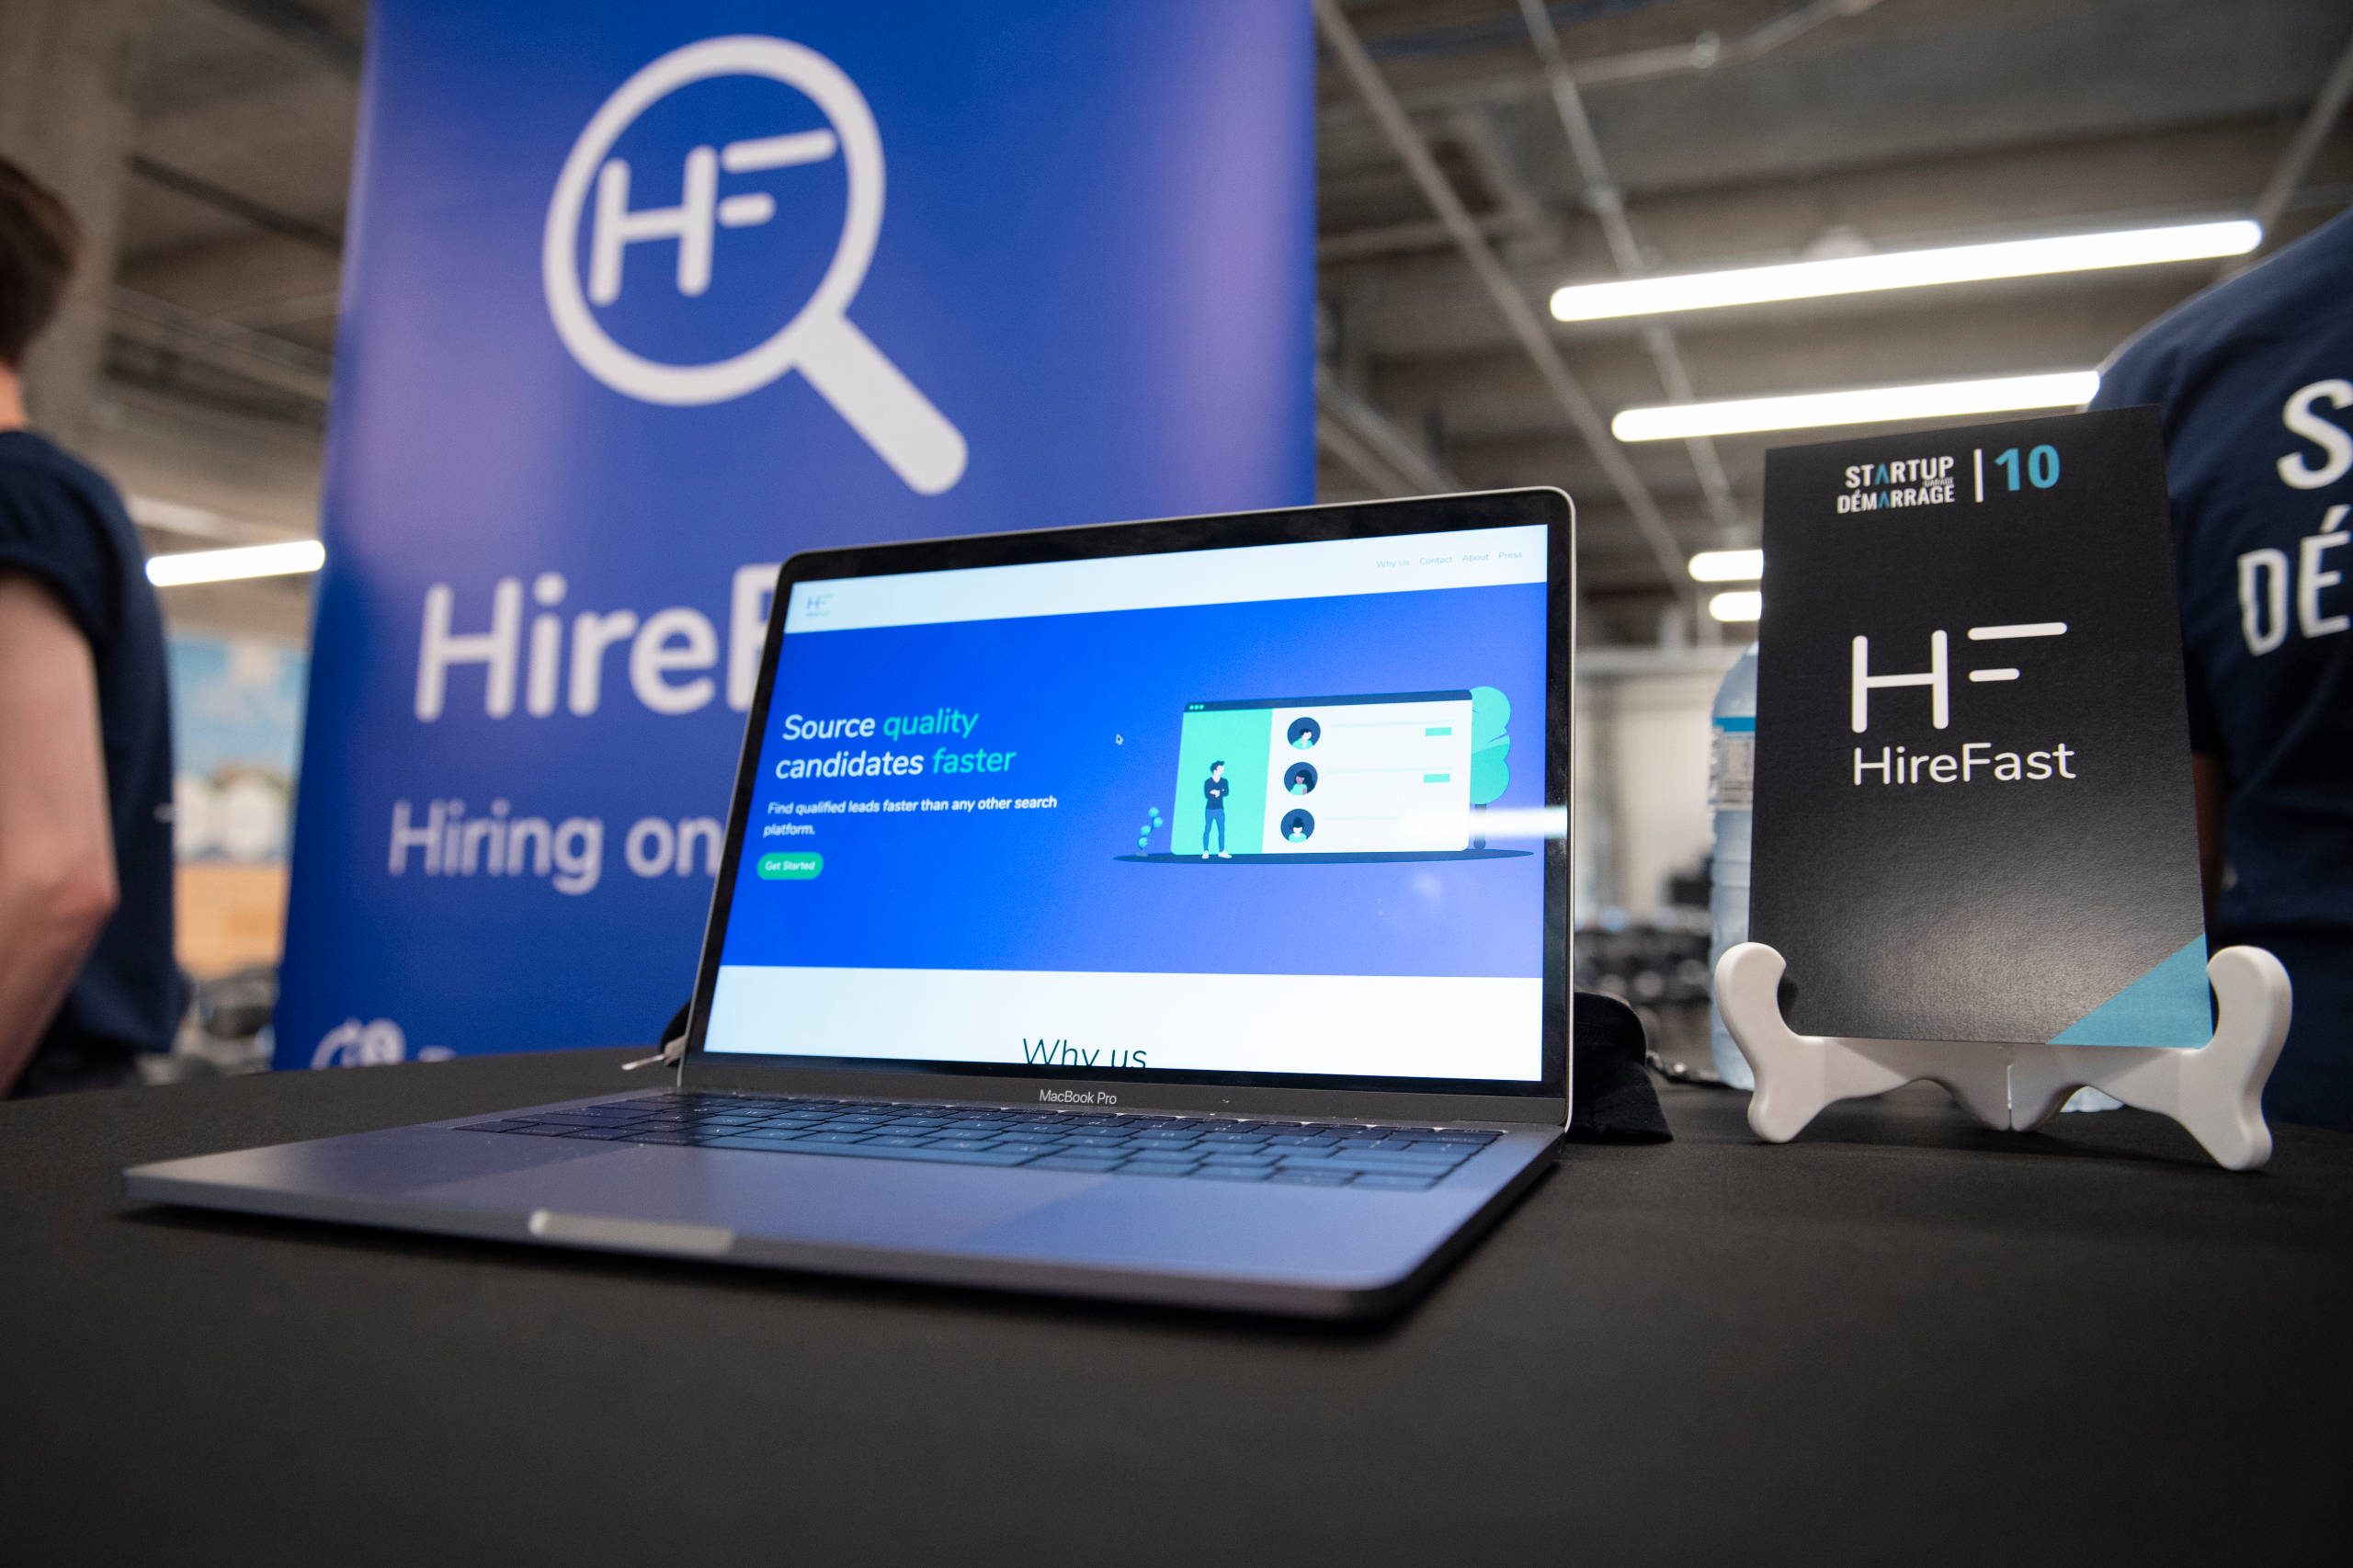 HireFast interface